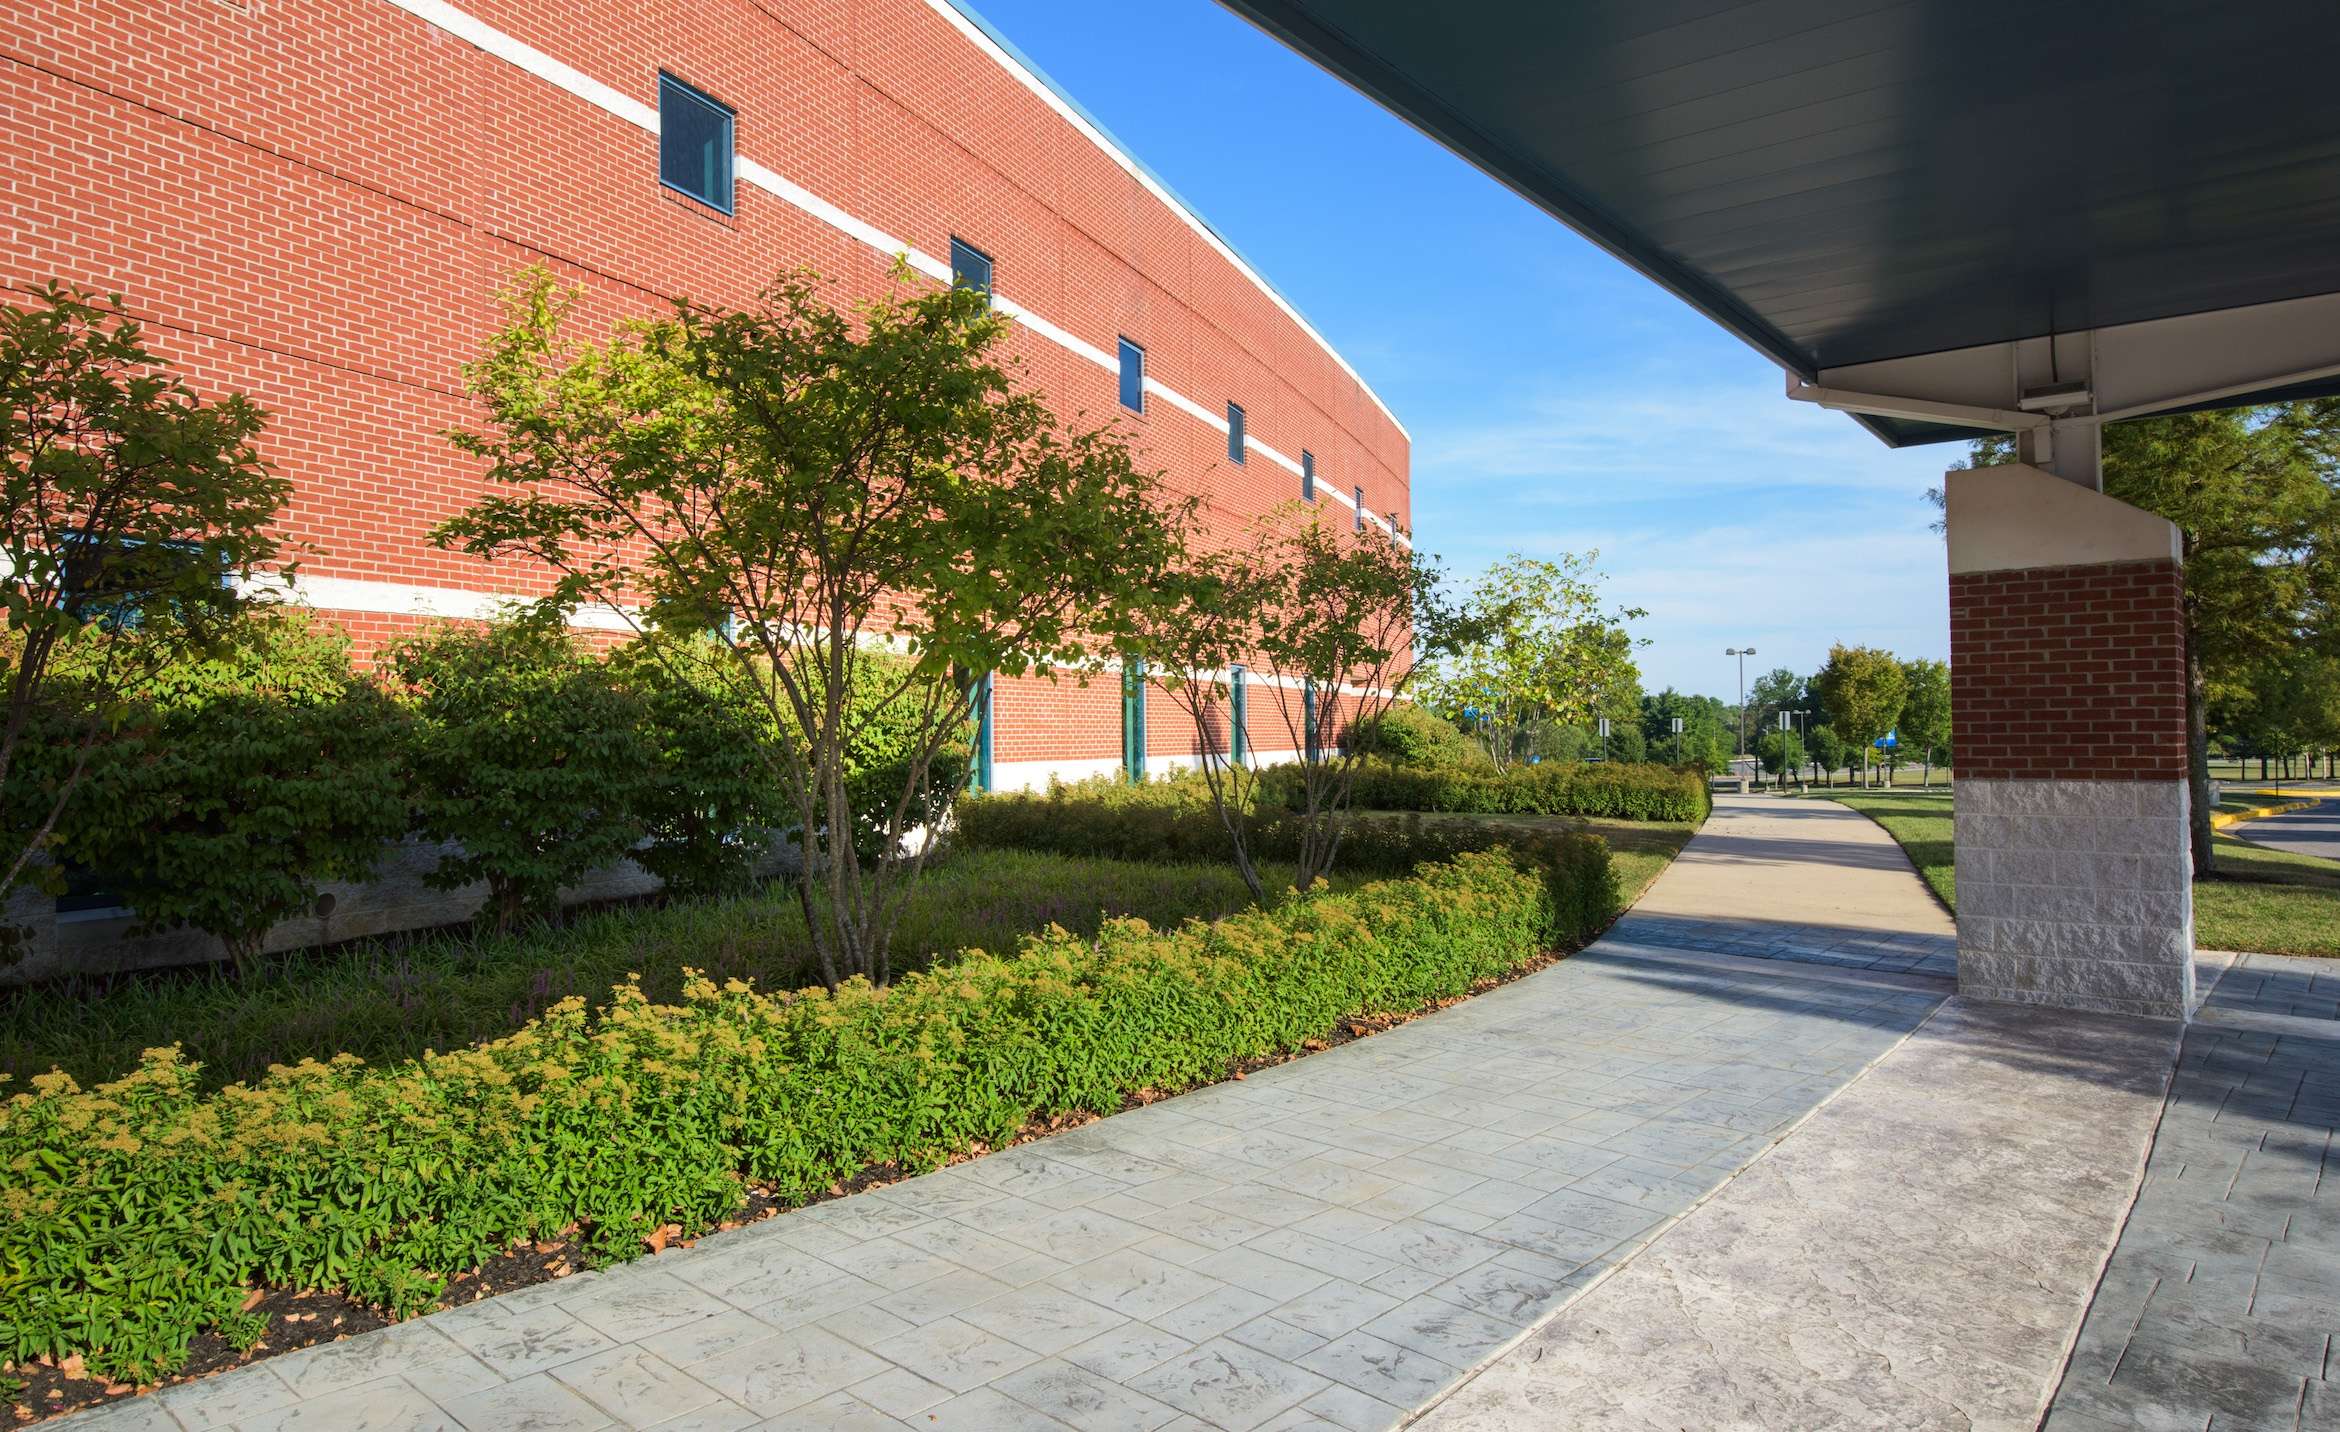 6 Factors Affecting the Cost of Commercial Landscape Maintenance in Washington DC